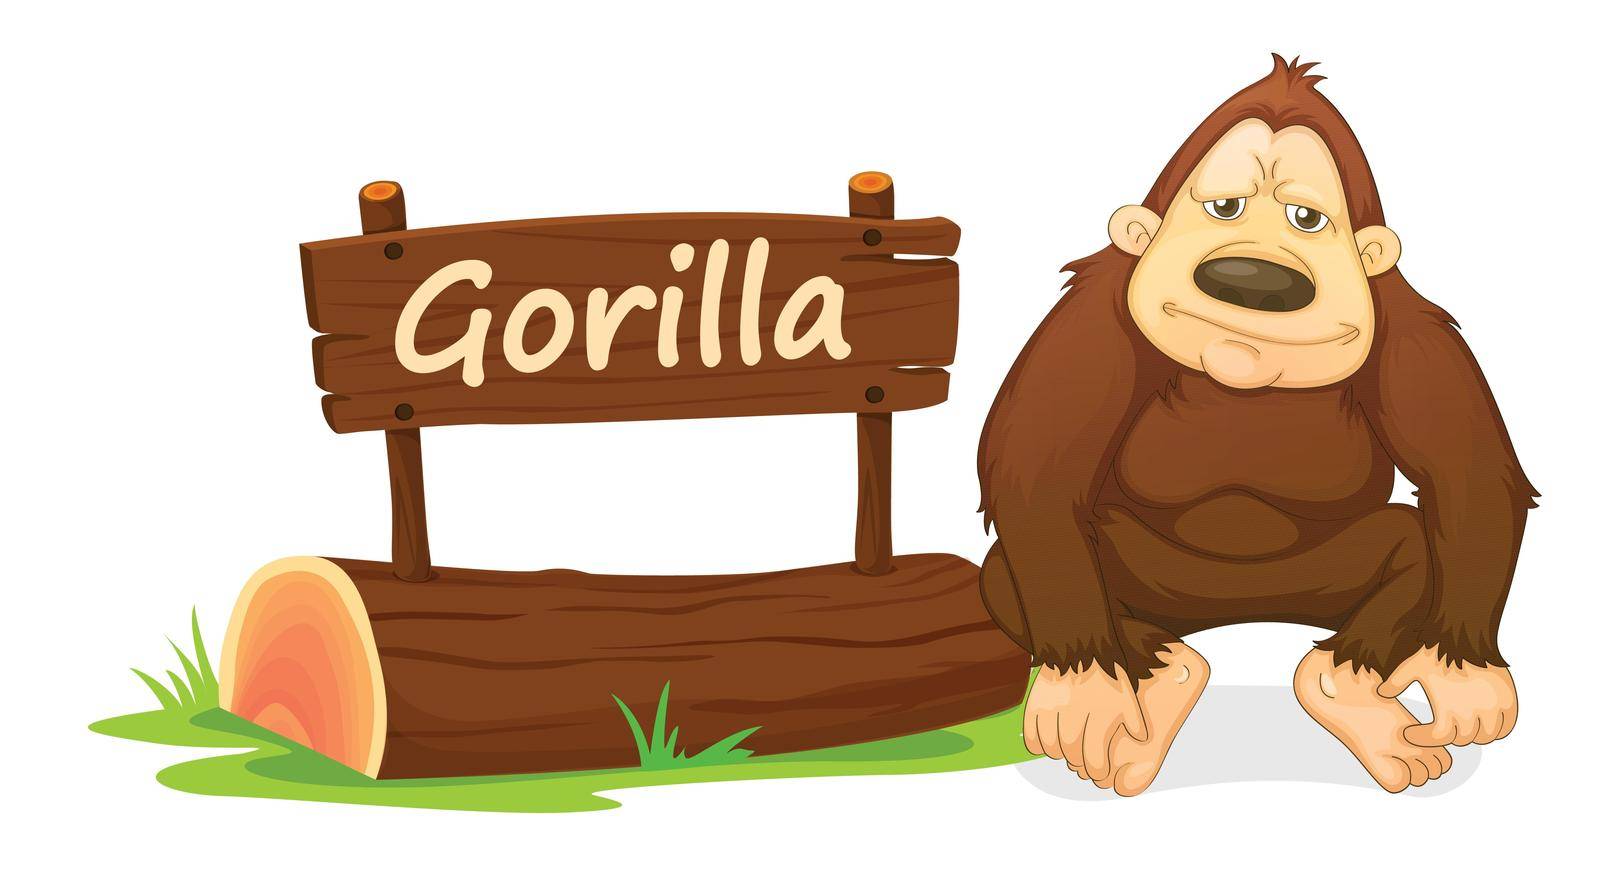 gorilla and name plate by iimages